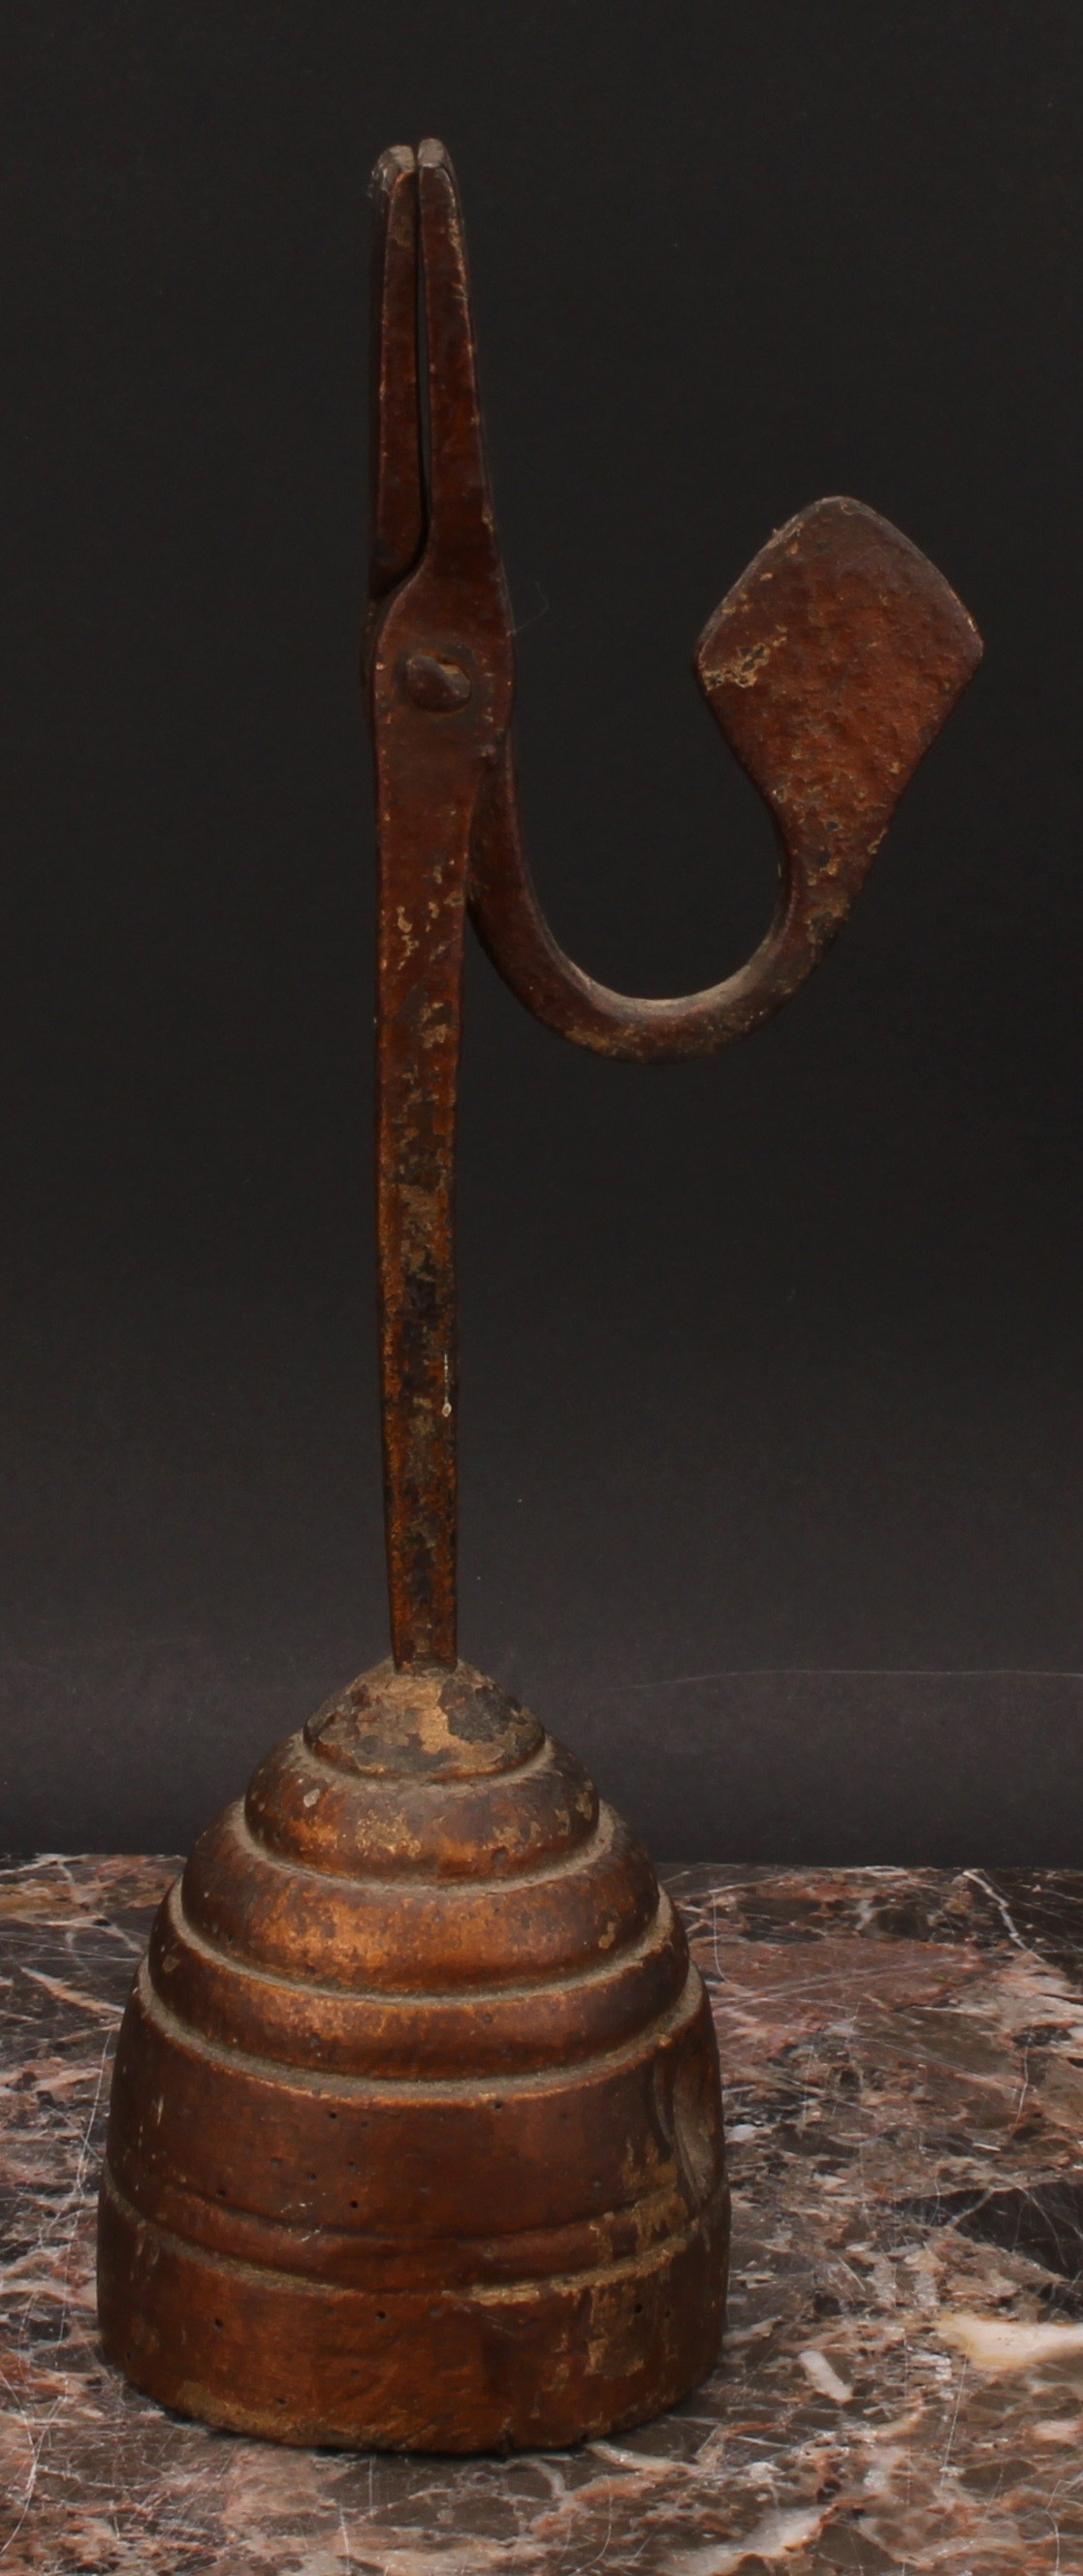 A wrought iron nip rushlight holder, stepped circular wood base, 27cm high, 18th/19th century - Image 3 of 3